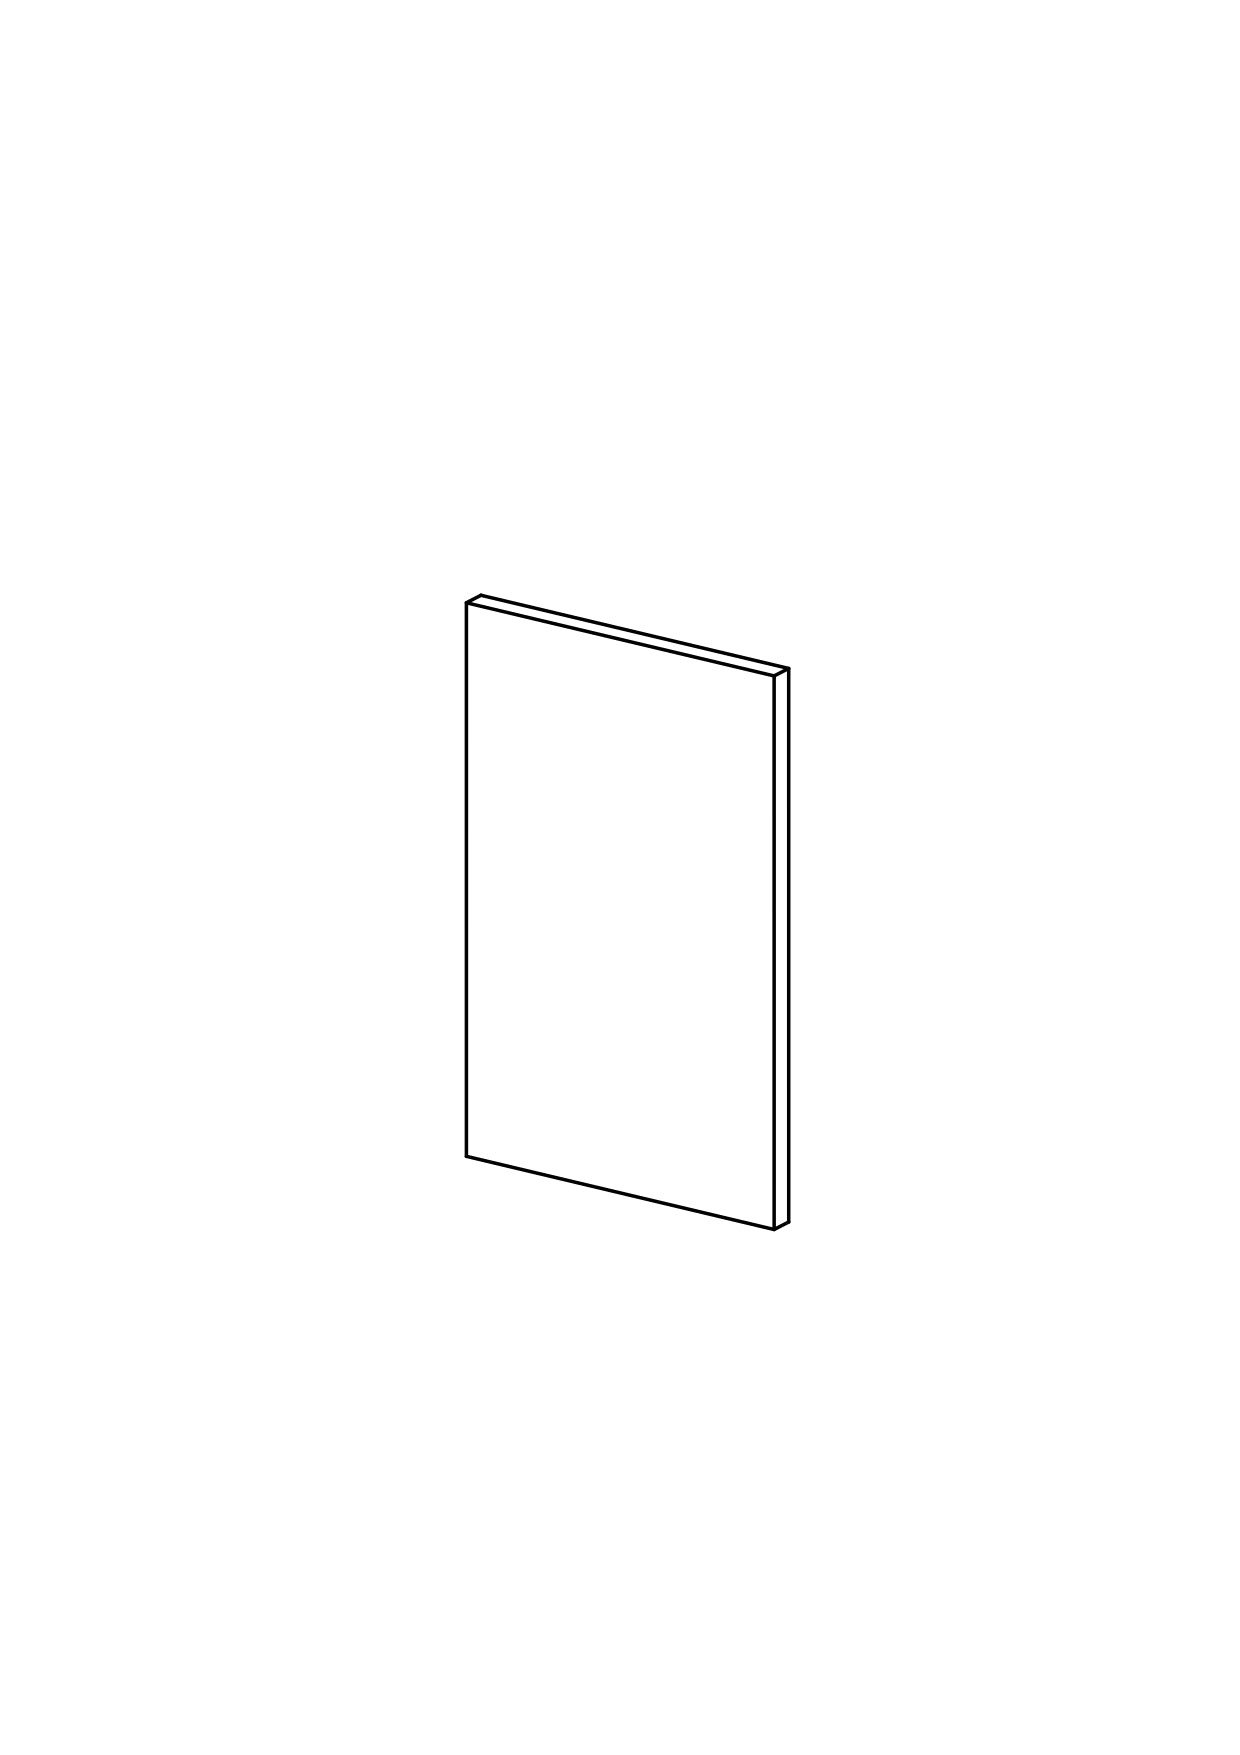 62x100 - Cover Panel - Plain - Unpainted (Raw) - METOD